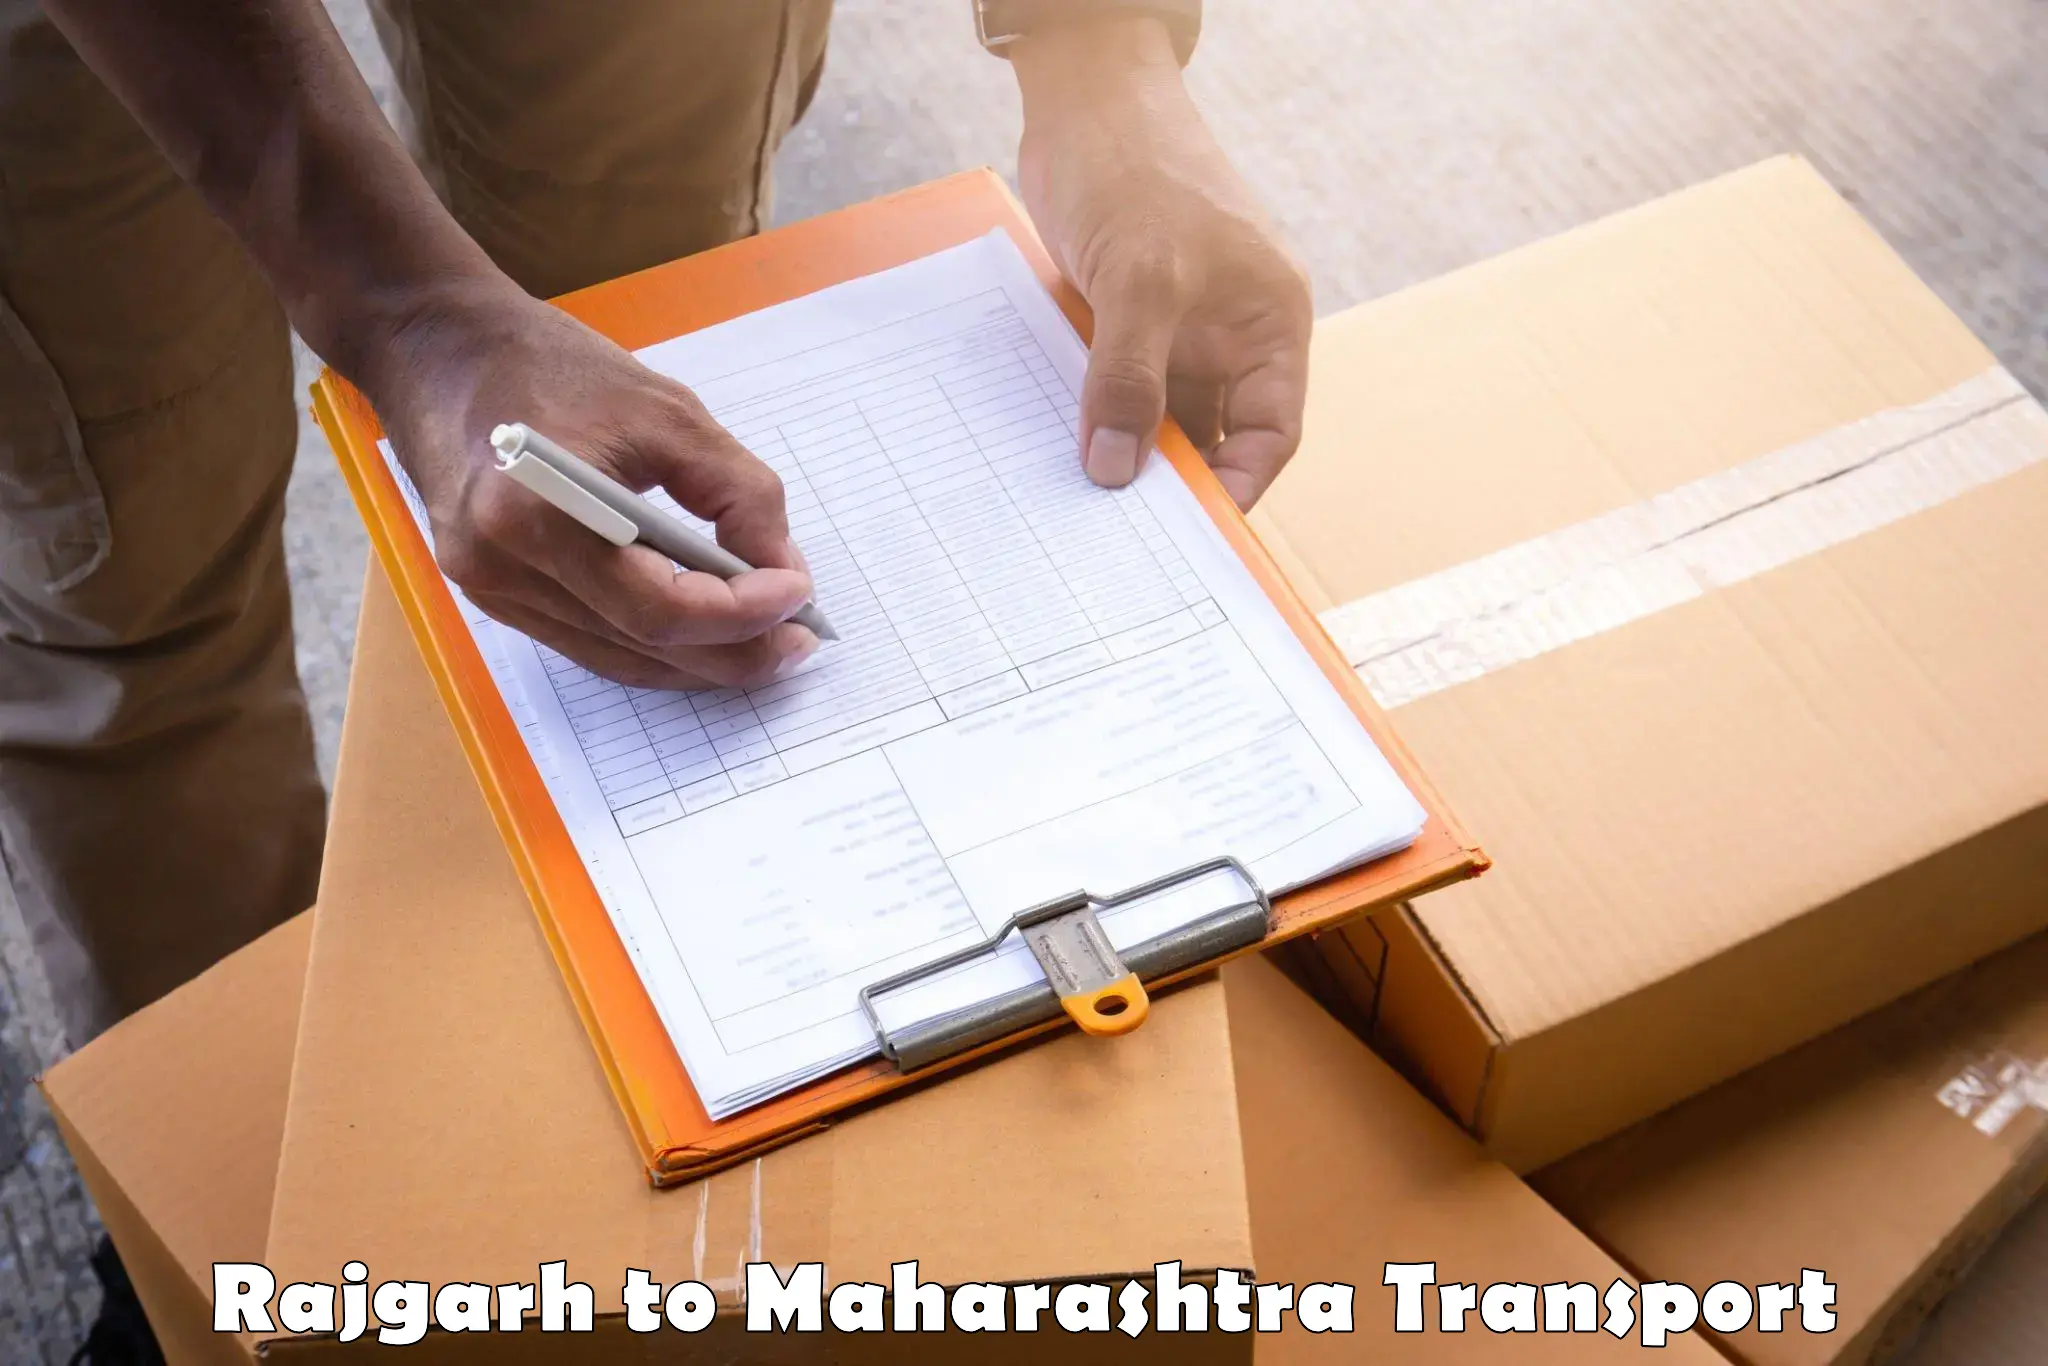 Air freight transport services Rajgarh to Lonar